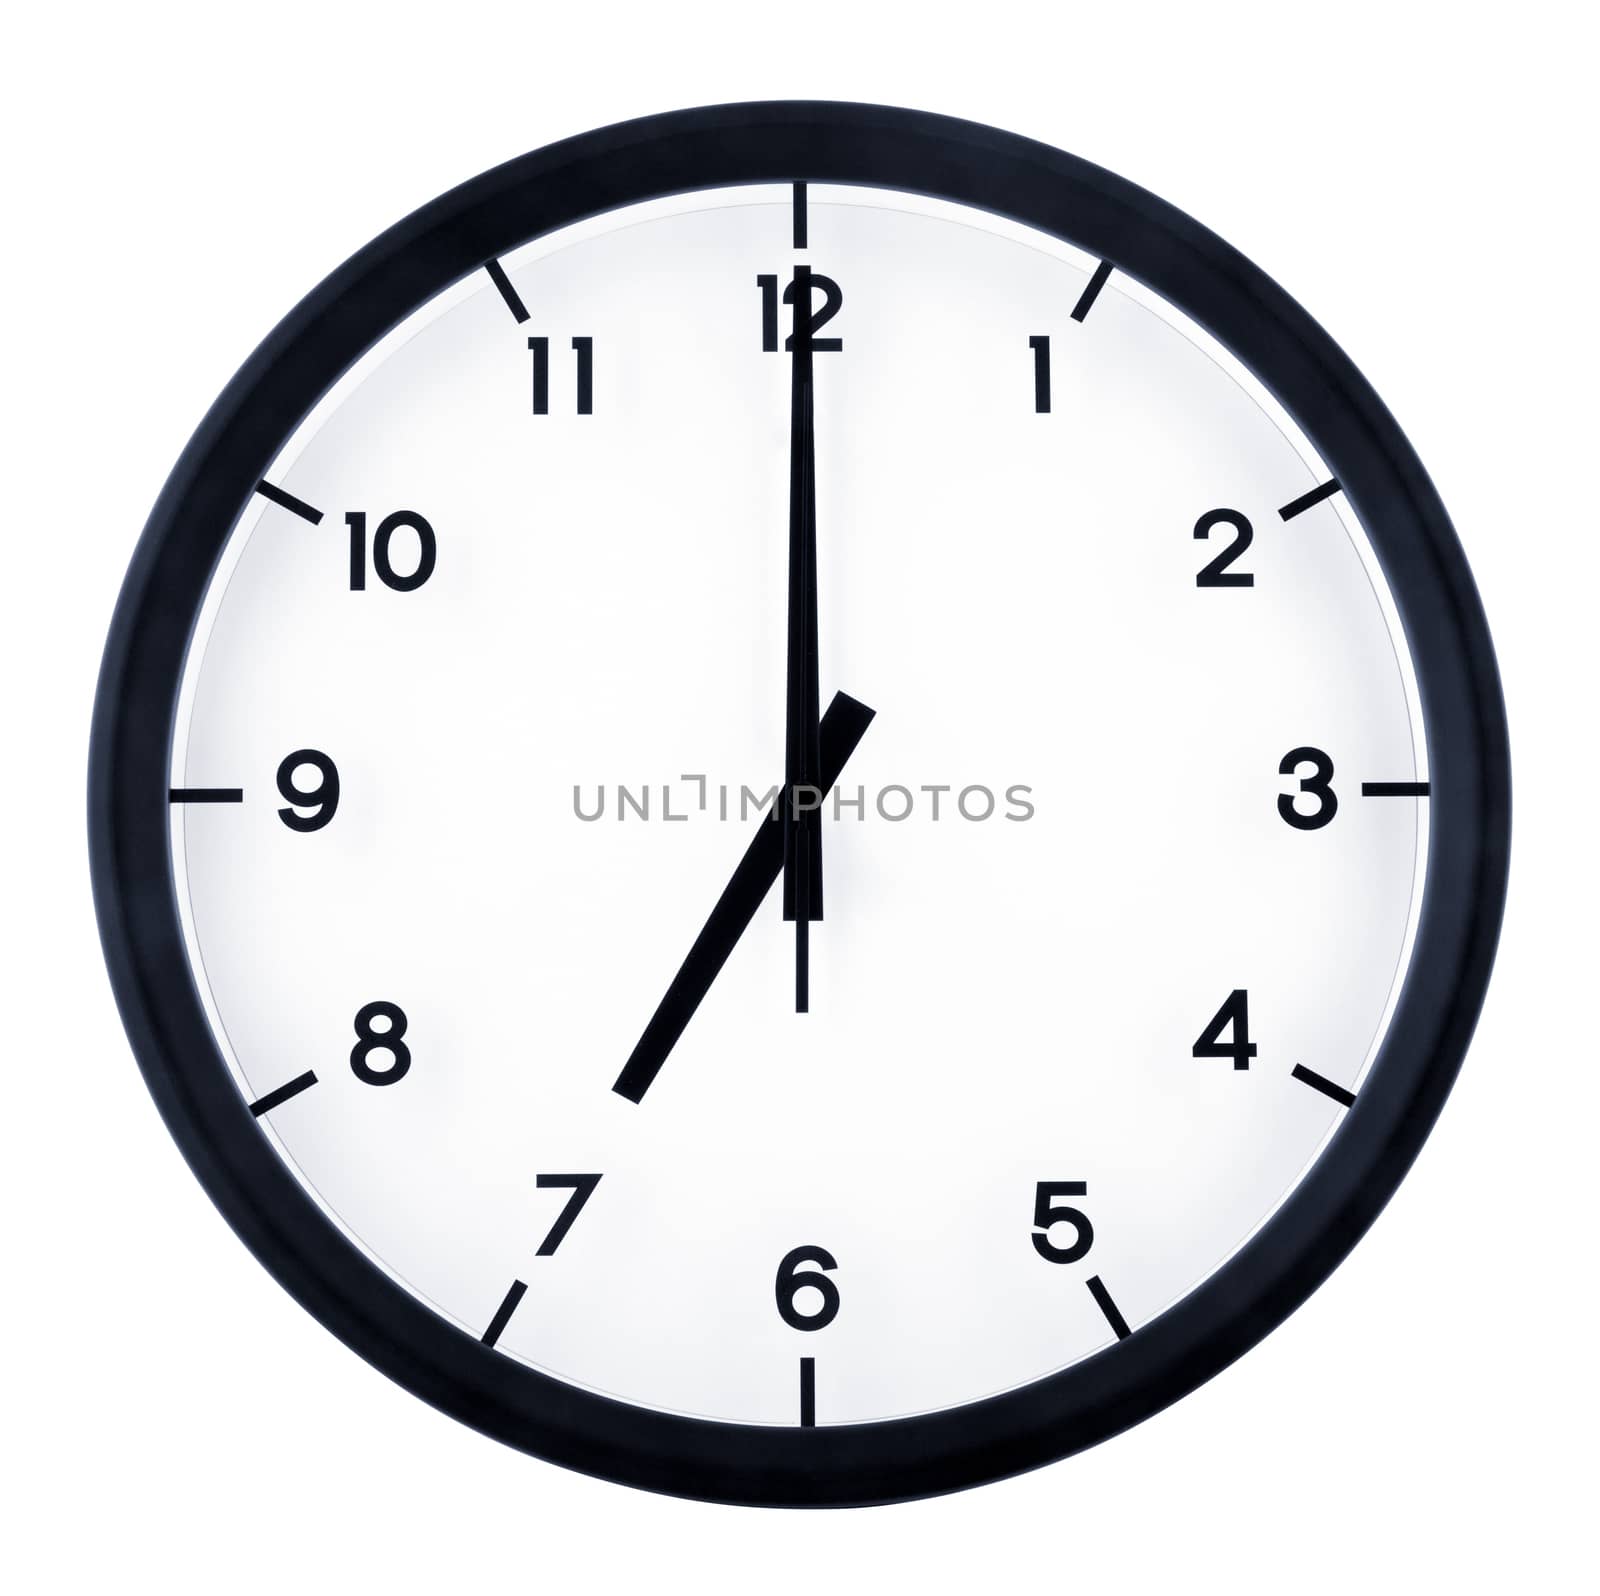 Classic analog clock pointing at 7 o'clock, isolated on white background